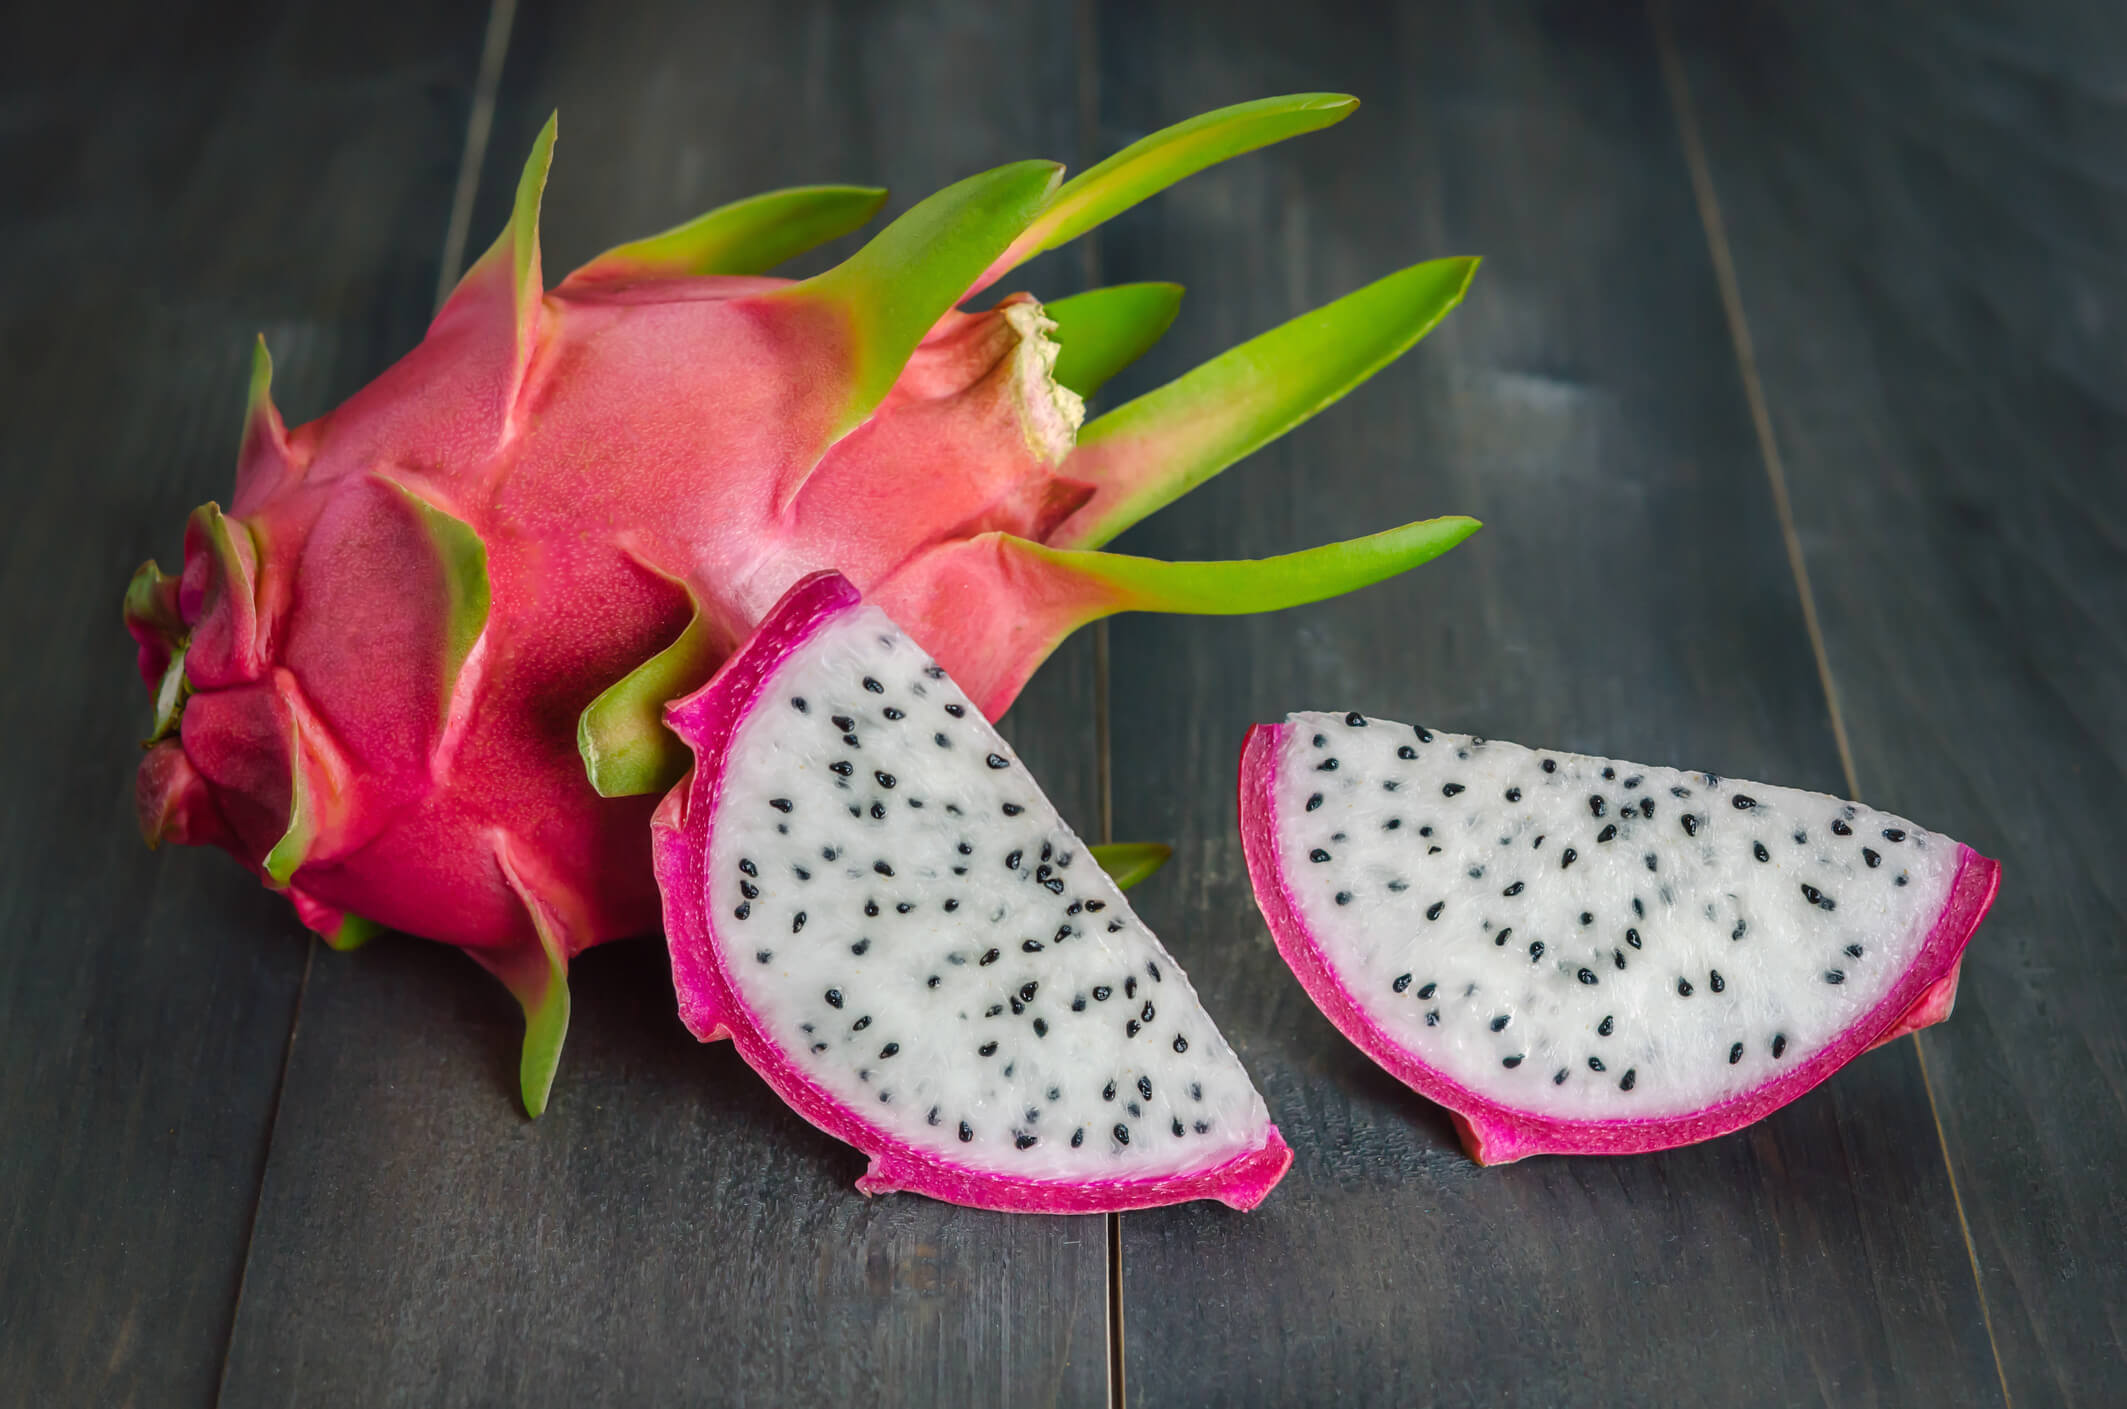 Dragon Fruit Plant How To Grow A Dragon Fruit Better Homes And Gardens,How Many Shots In A Handle Of Vodka